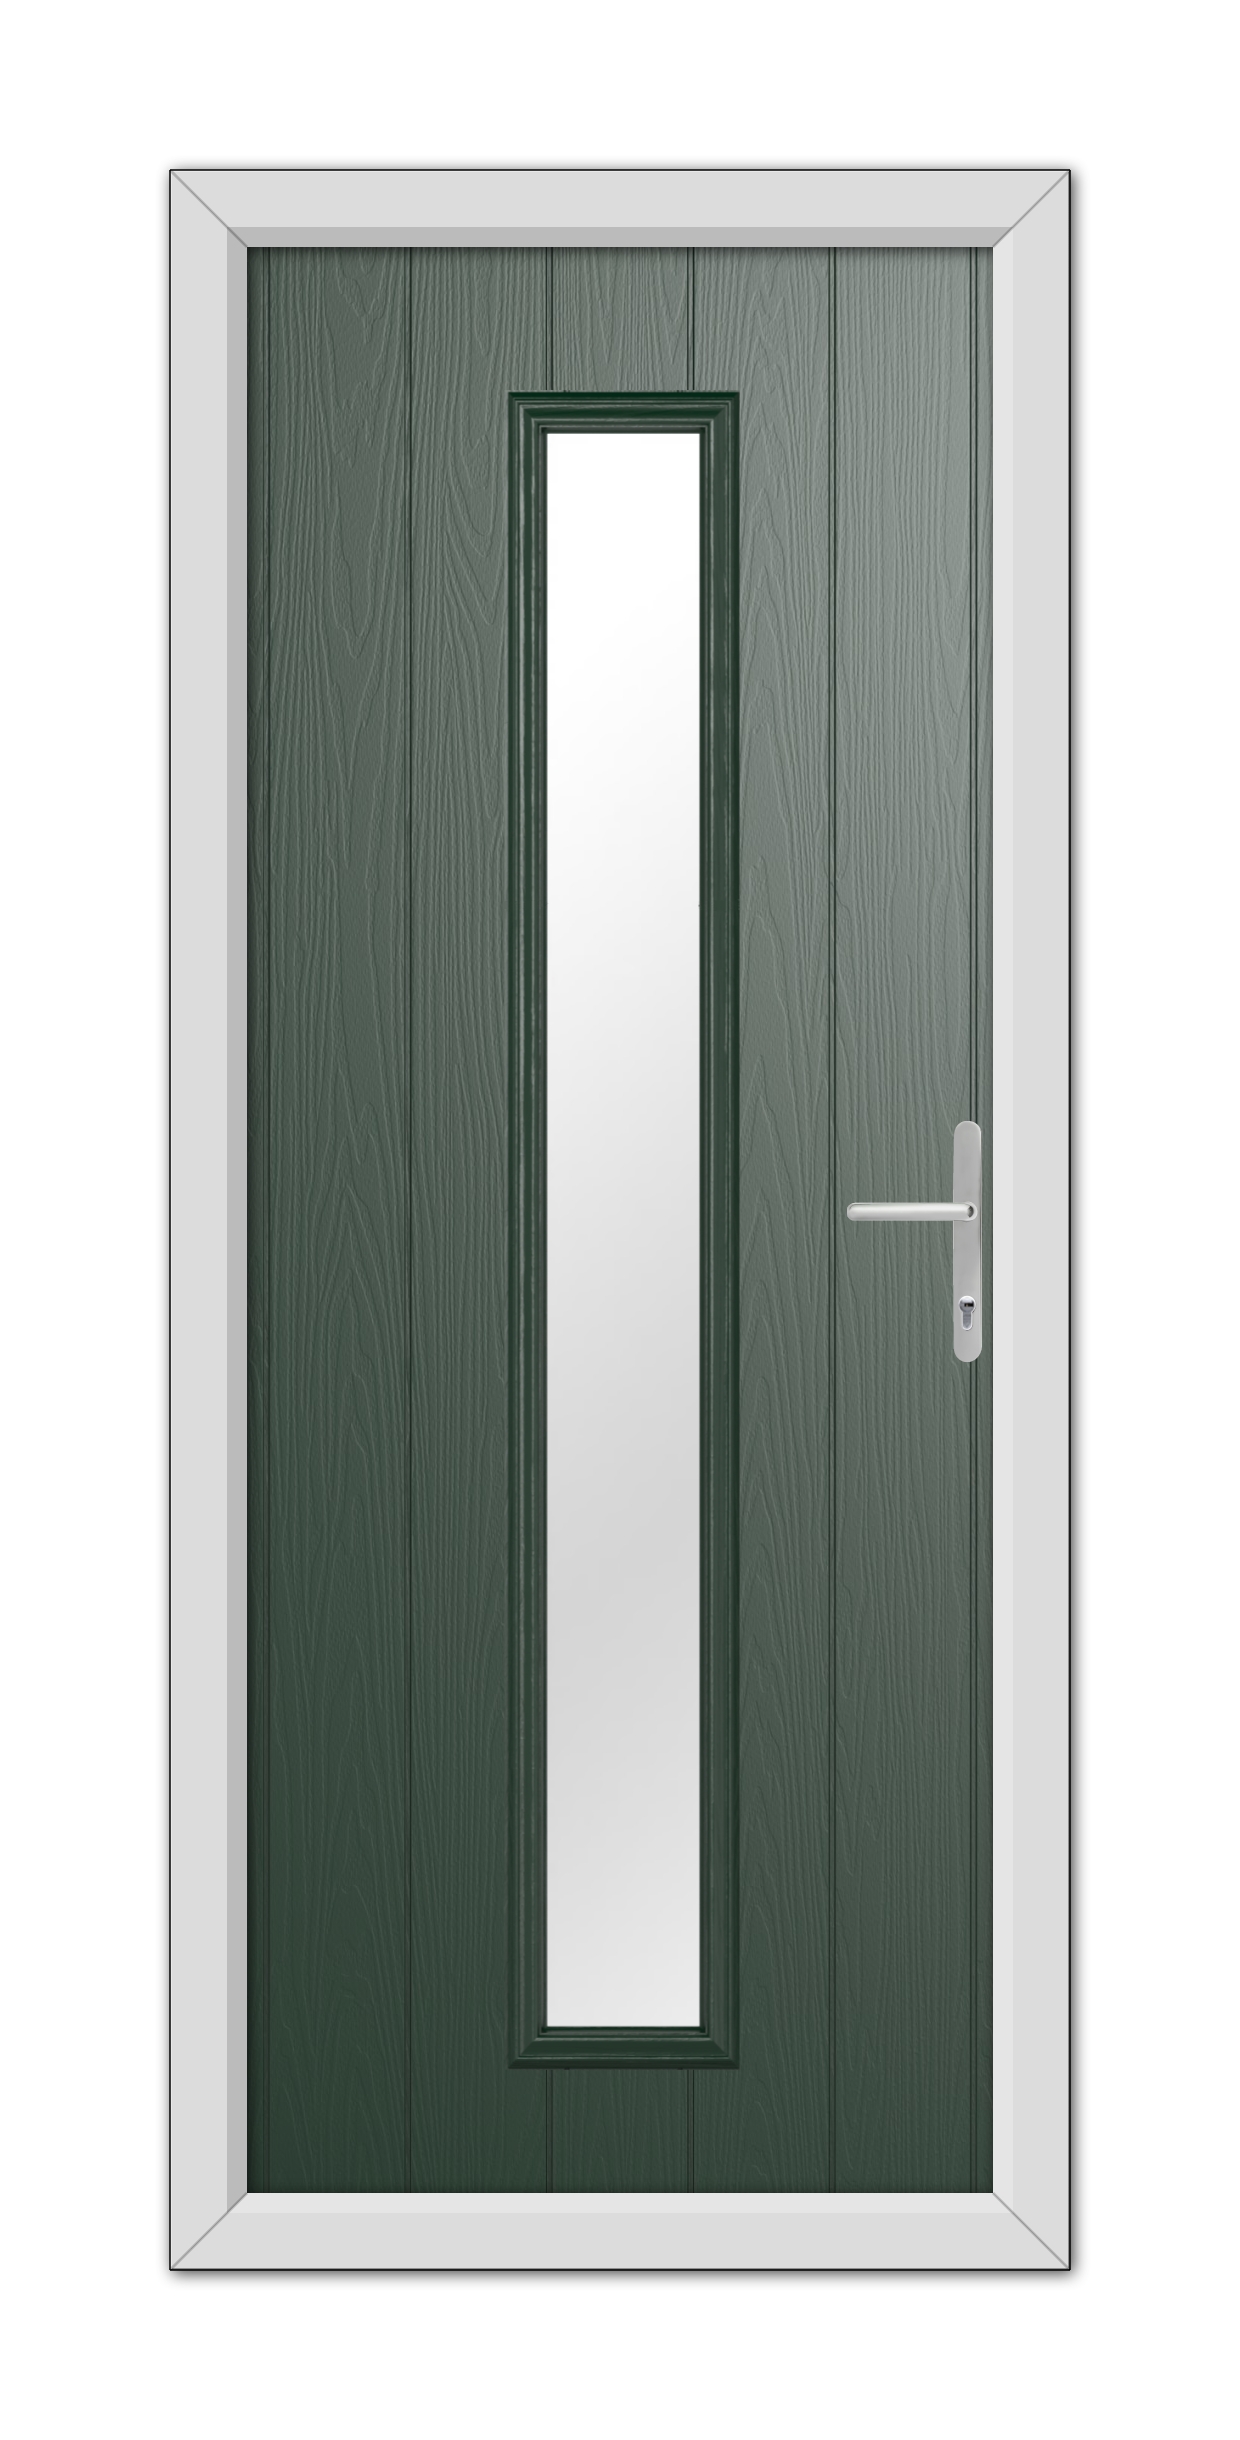 A Green Rutland Composite Door 48mm Timber Core with a long vertical glass panel and modern white handle, set in a white frame.